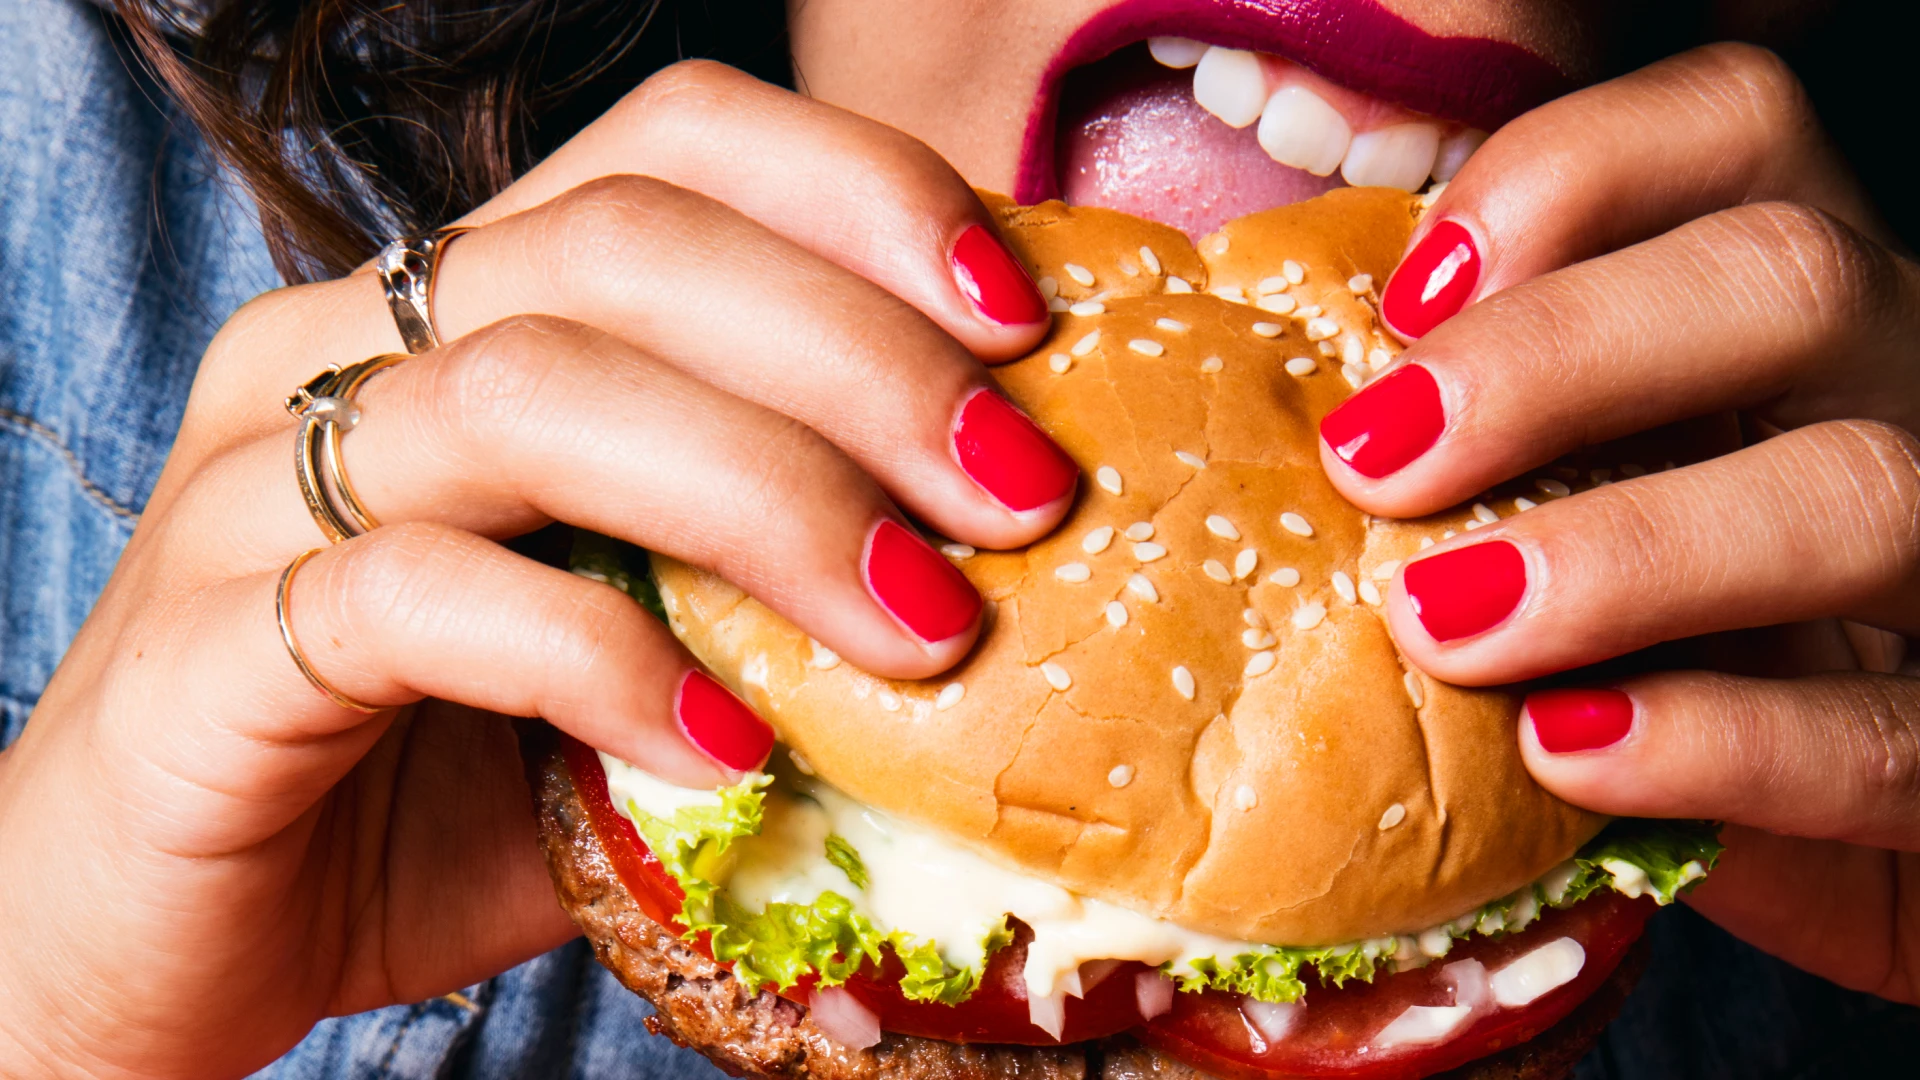 A woman eating an Impossible™ Burger sandwich with lettuce, tomato, onions, and melty cheese.